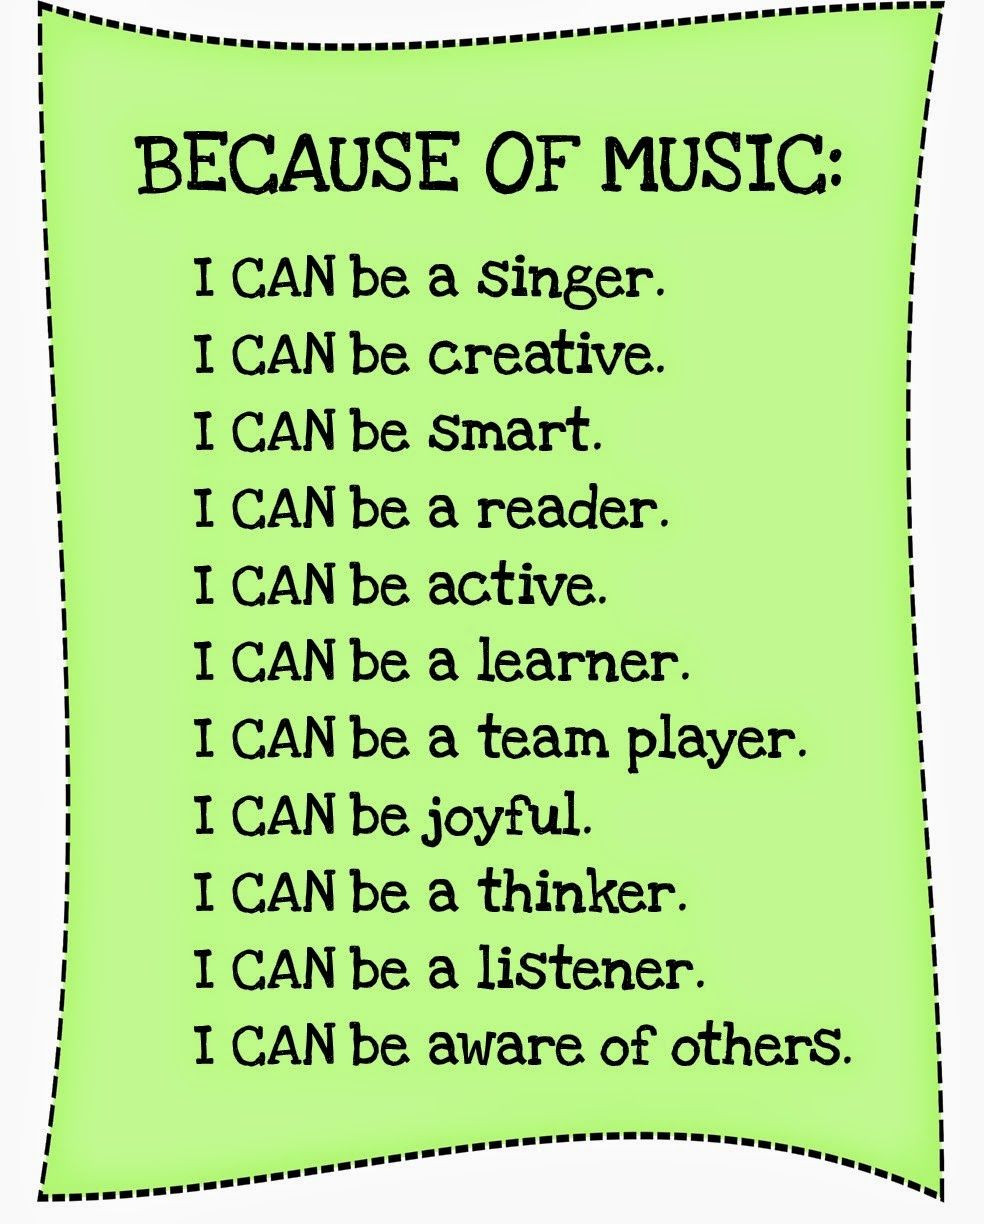 Music Education Quotes
 Pin by Kayla Dokken on Education Ideas